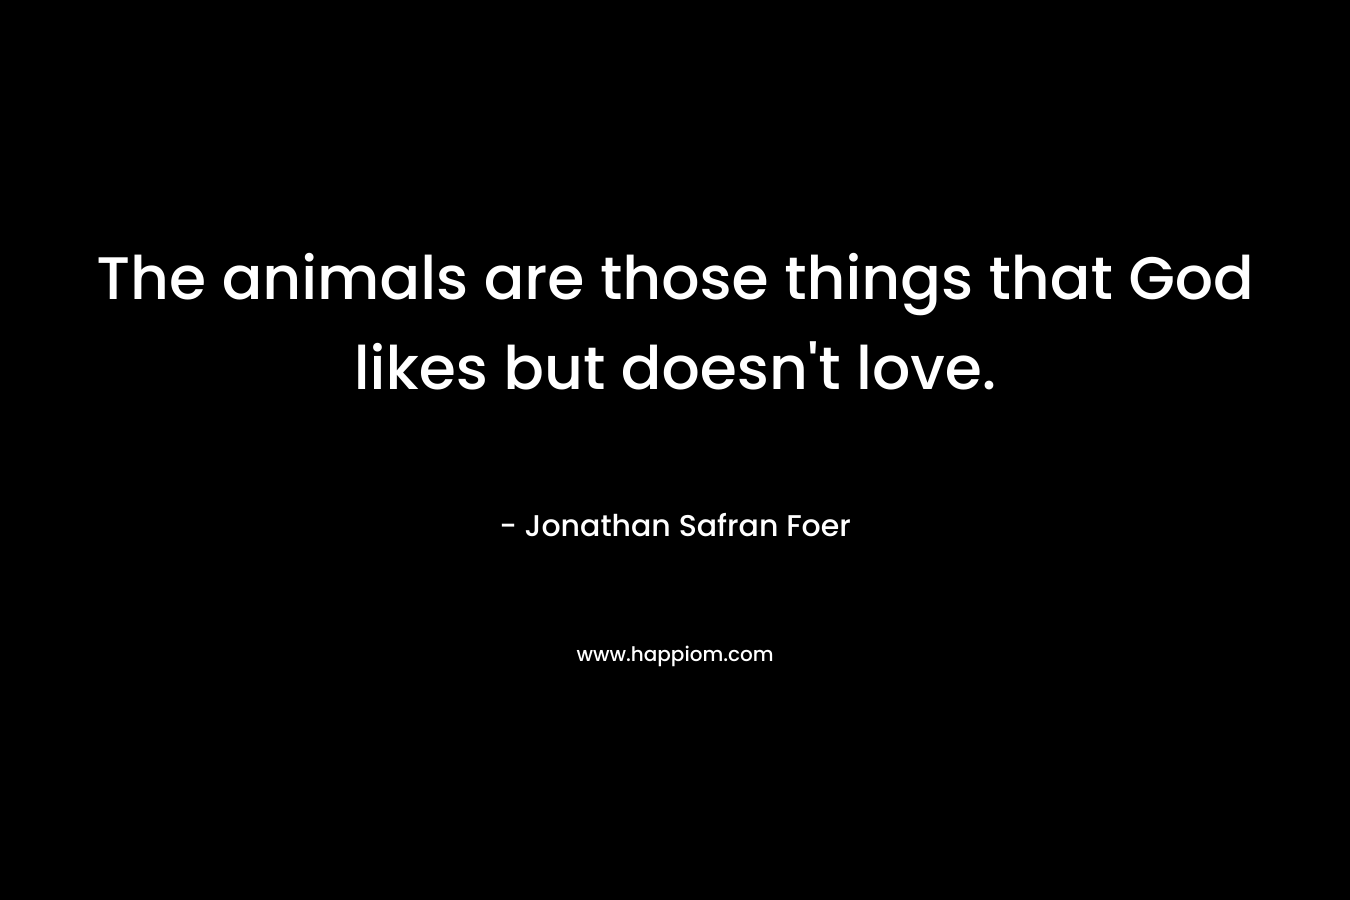 The animals are those things that God likes but doesn’t love. – Jonathan Safran Foer